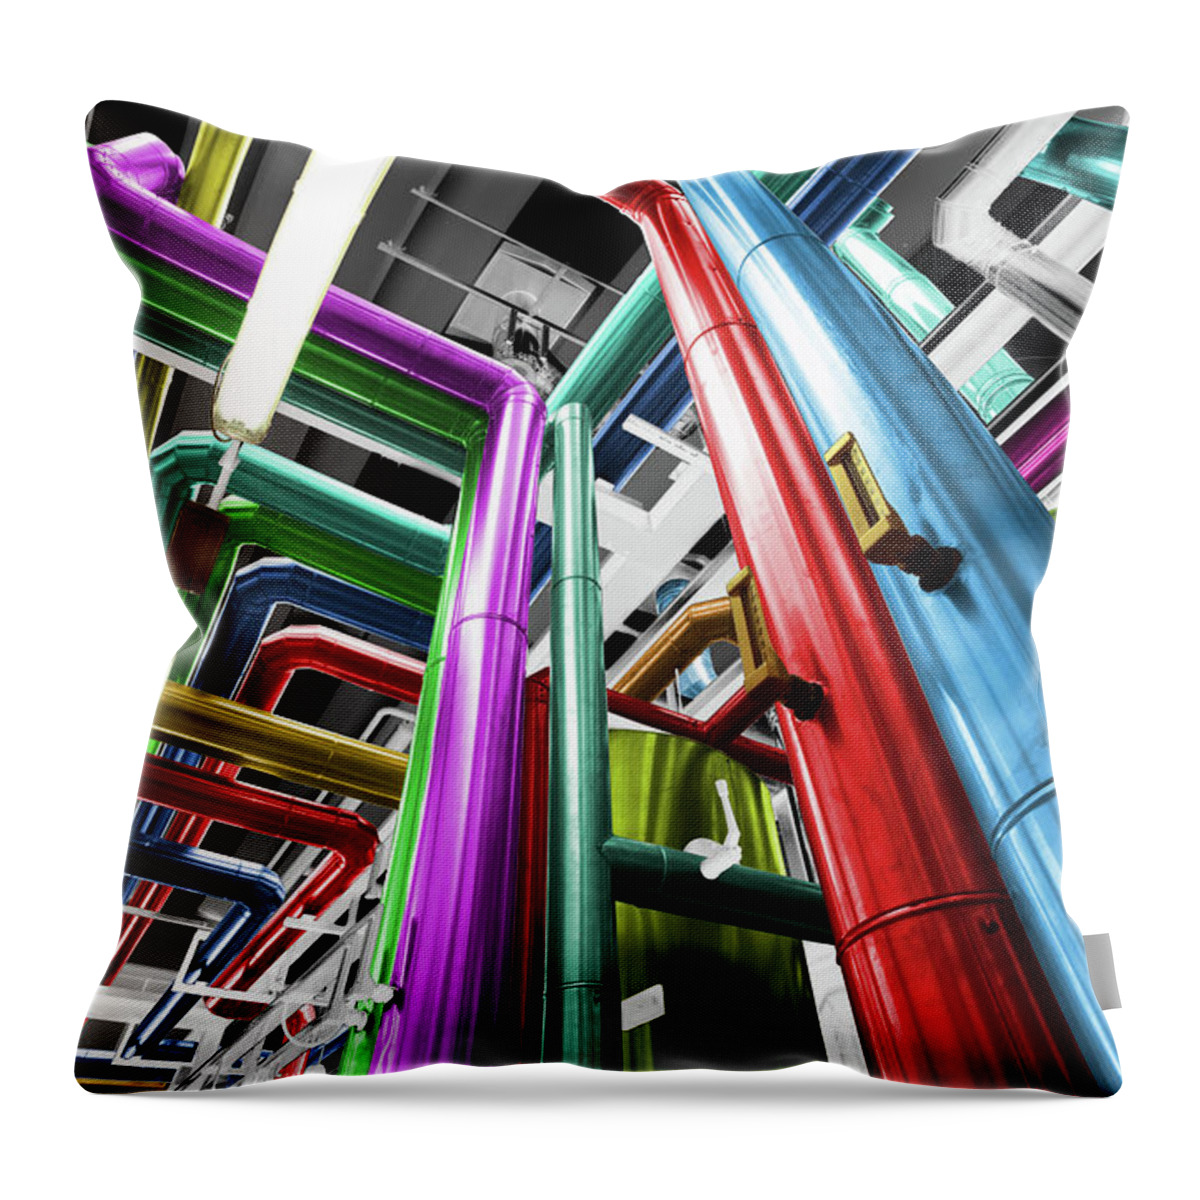 Manufacturing Equipment Throw Pillow featuring the photograph Thermal Power Plant With Its Pipes by Seraficus